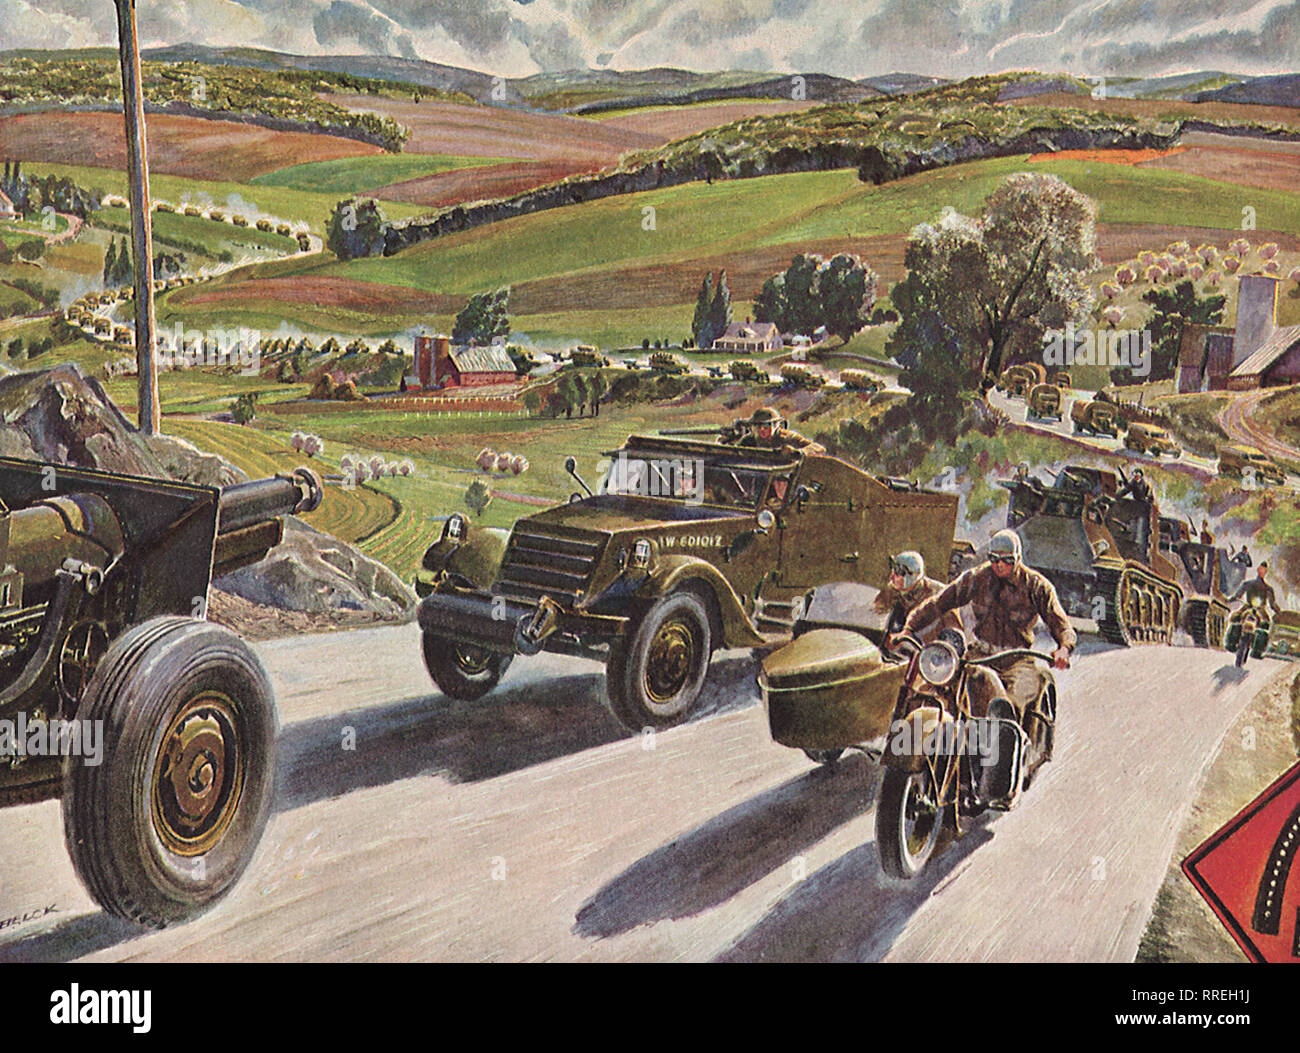 Half-tracks, Motorcycles and Troops on Country Road. Stock Photo